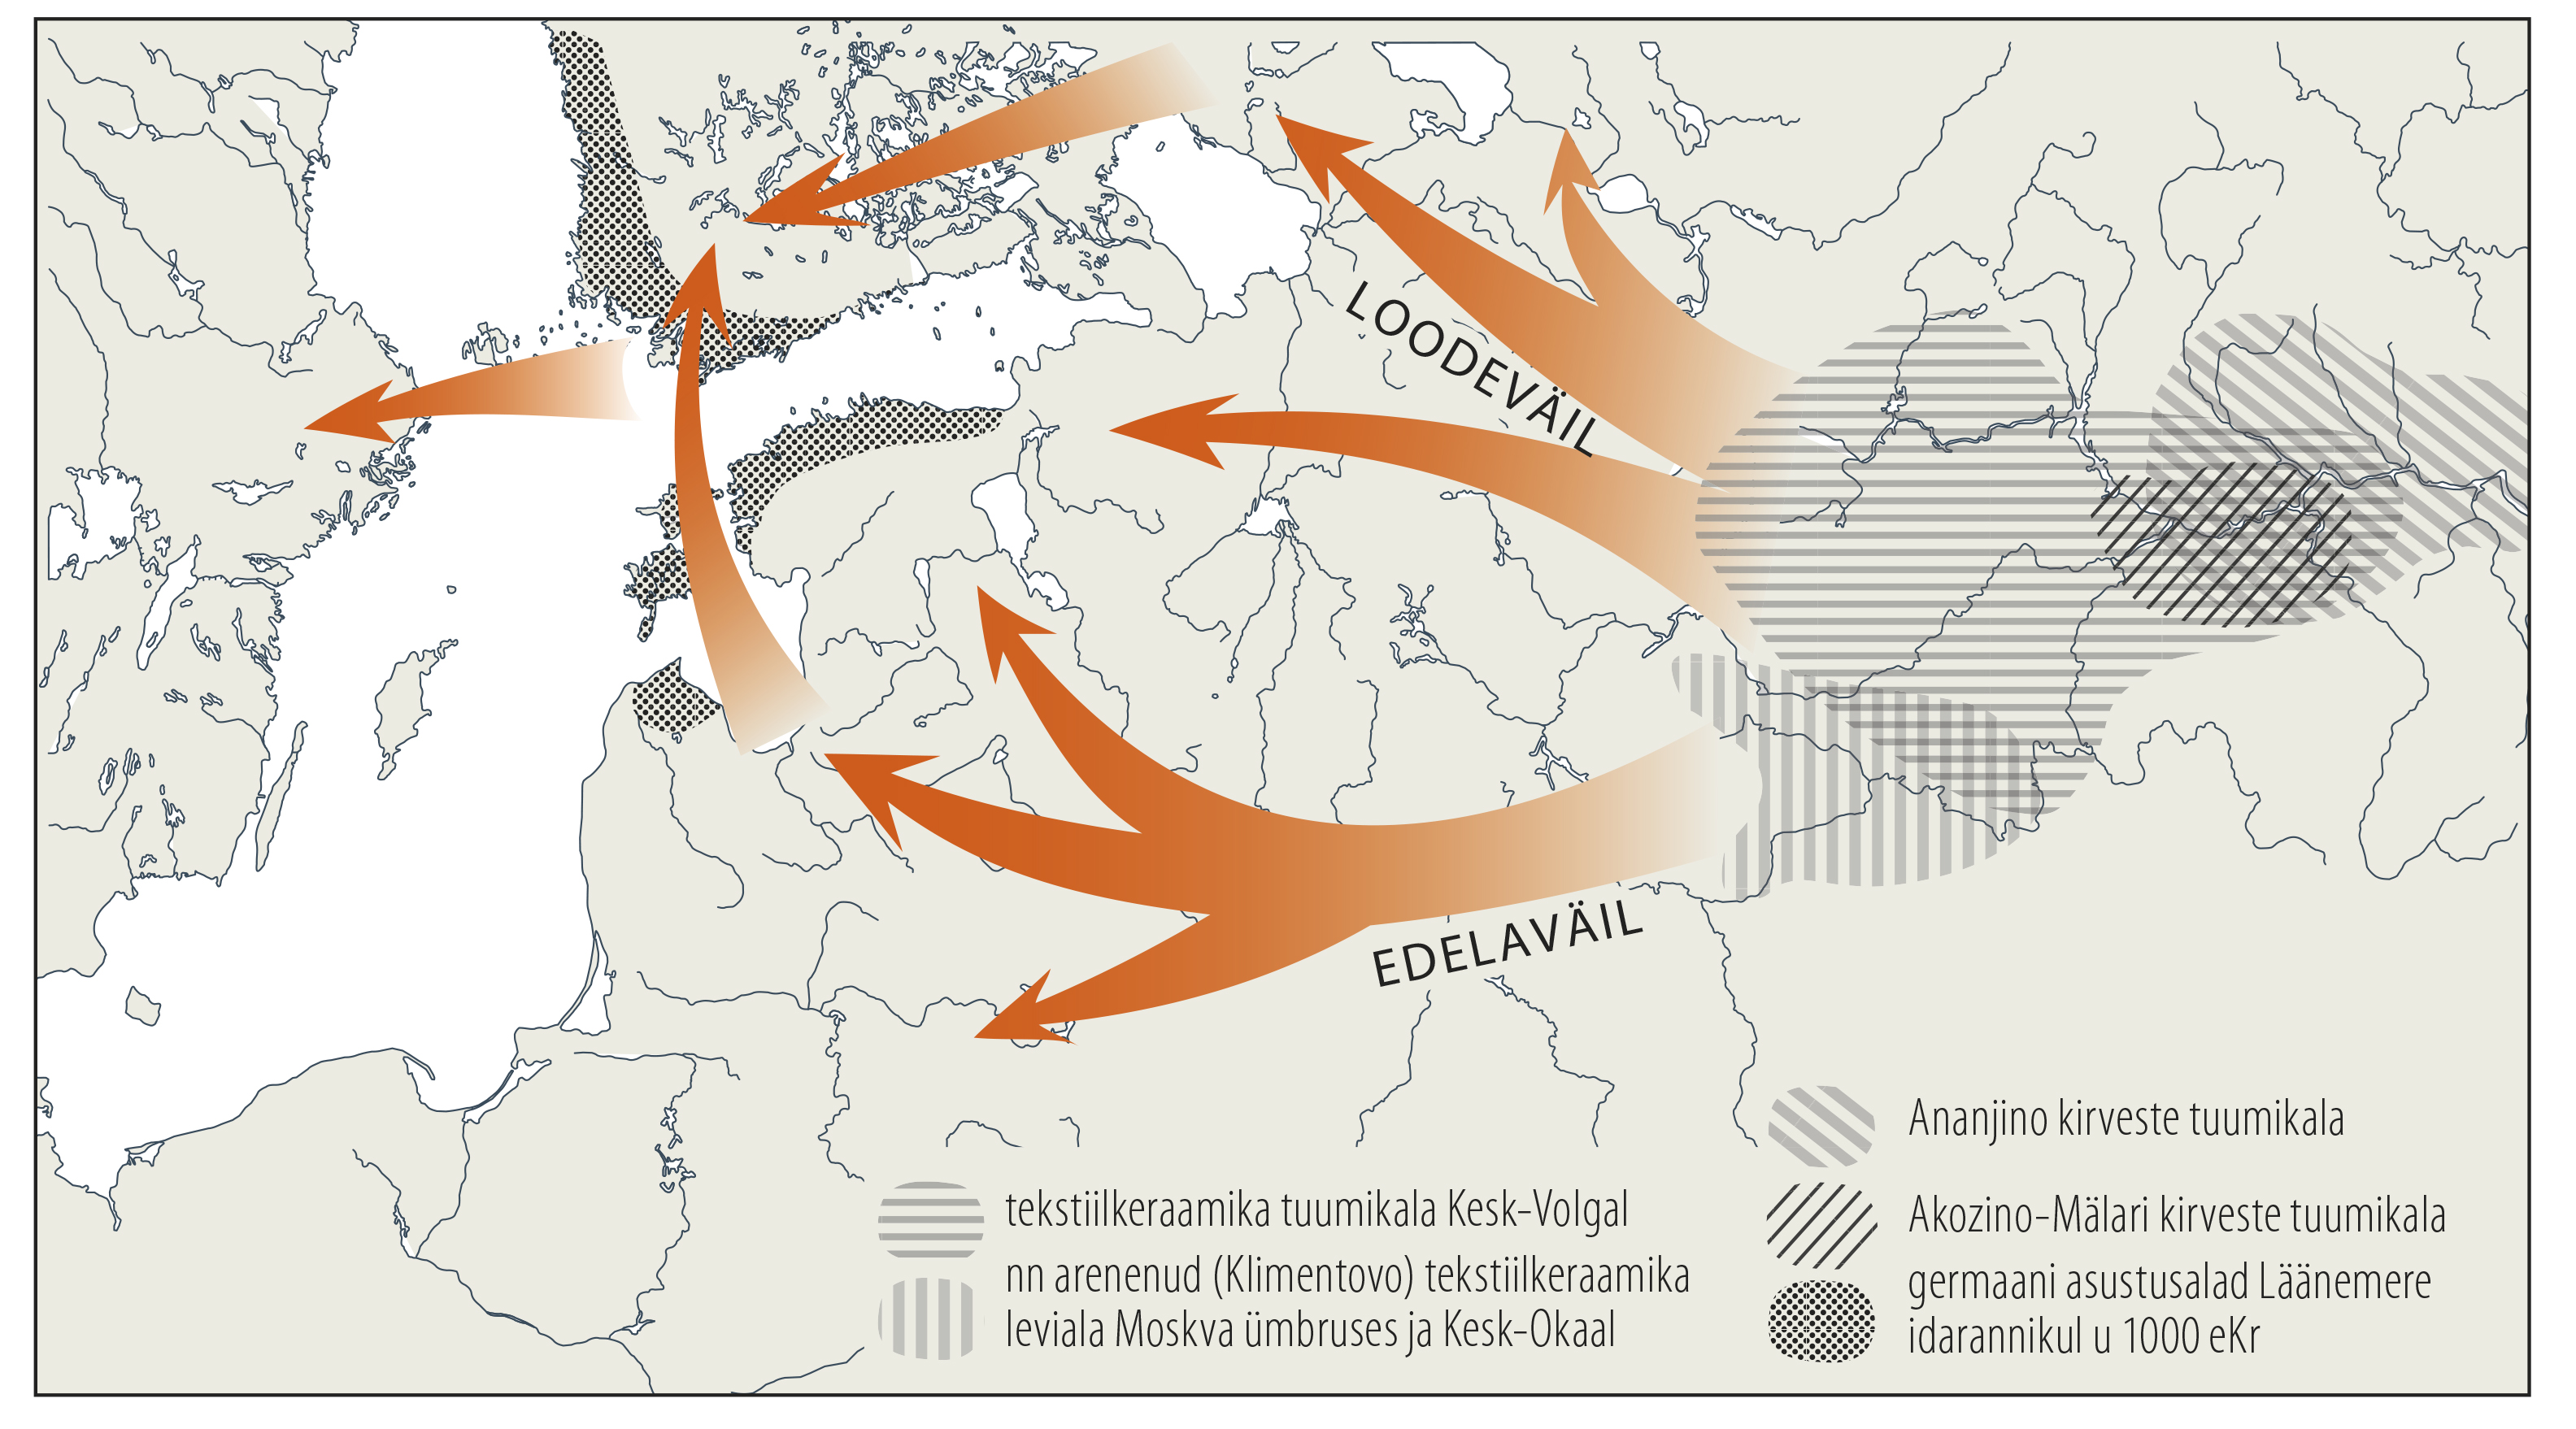 A map of Finland, central Russia and the Baltic States, showing the core area of the West Meromans in the Volga-Urals region of central Russia, and the two main migration routes to the current settlements on the Baltic coast - the north-western route towards Karelia, northern Estonia and the southern coast of Finland, and the south-western route through Latvia to southern Estonia.